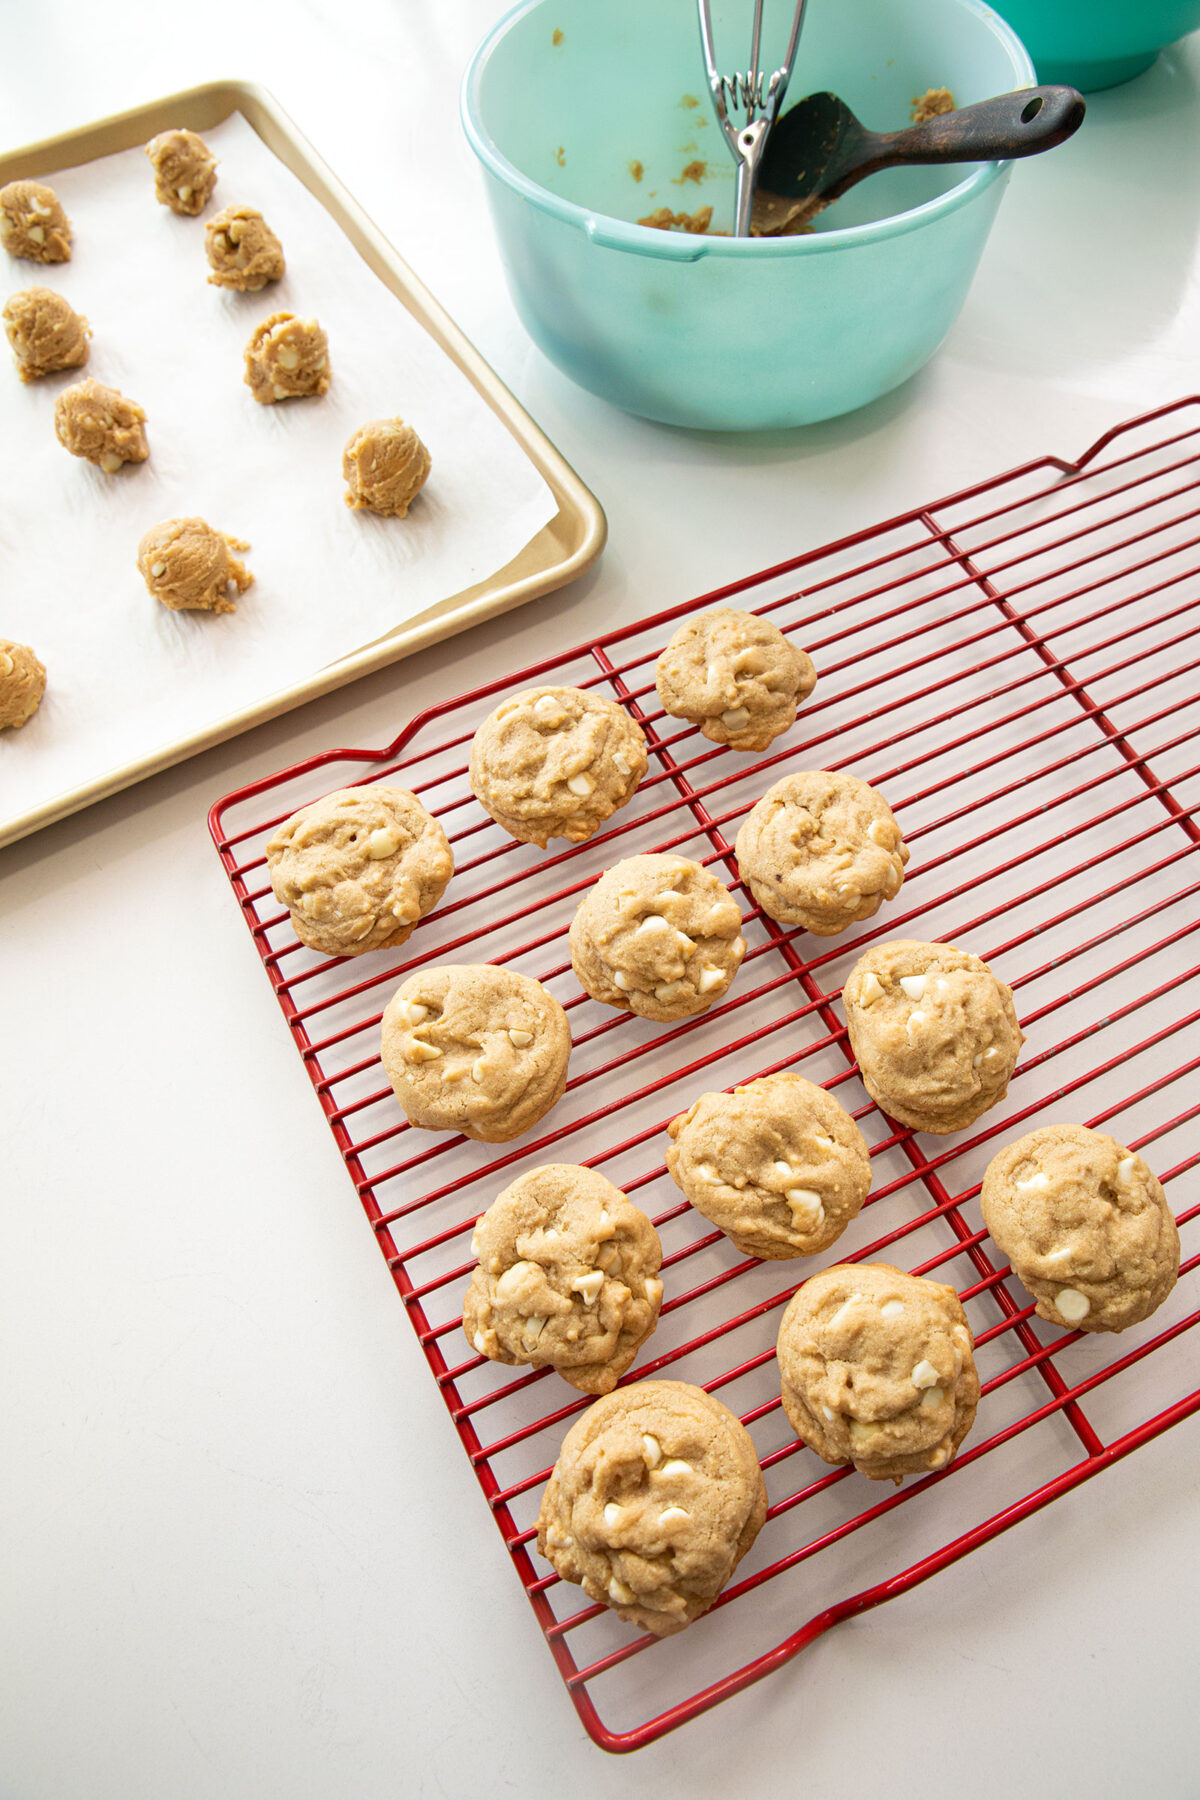 white chocolate chip macadamia nut cookies on a red cooling rack with uncooked cookies and baking tray behind them.